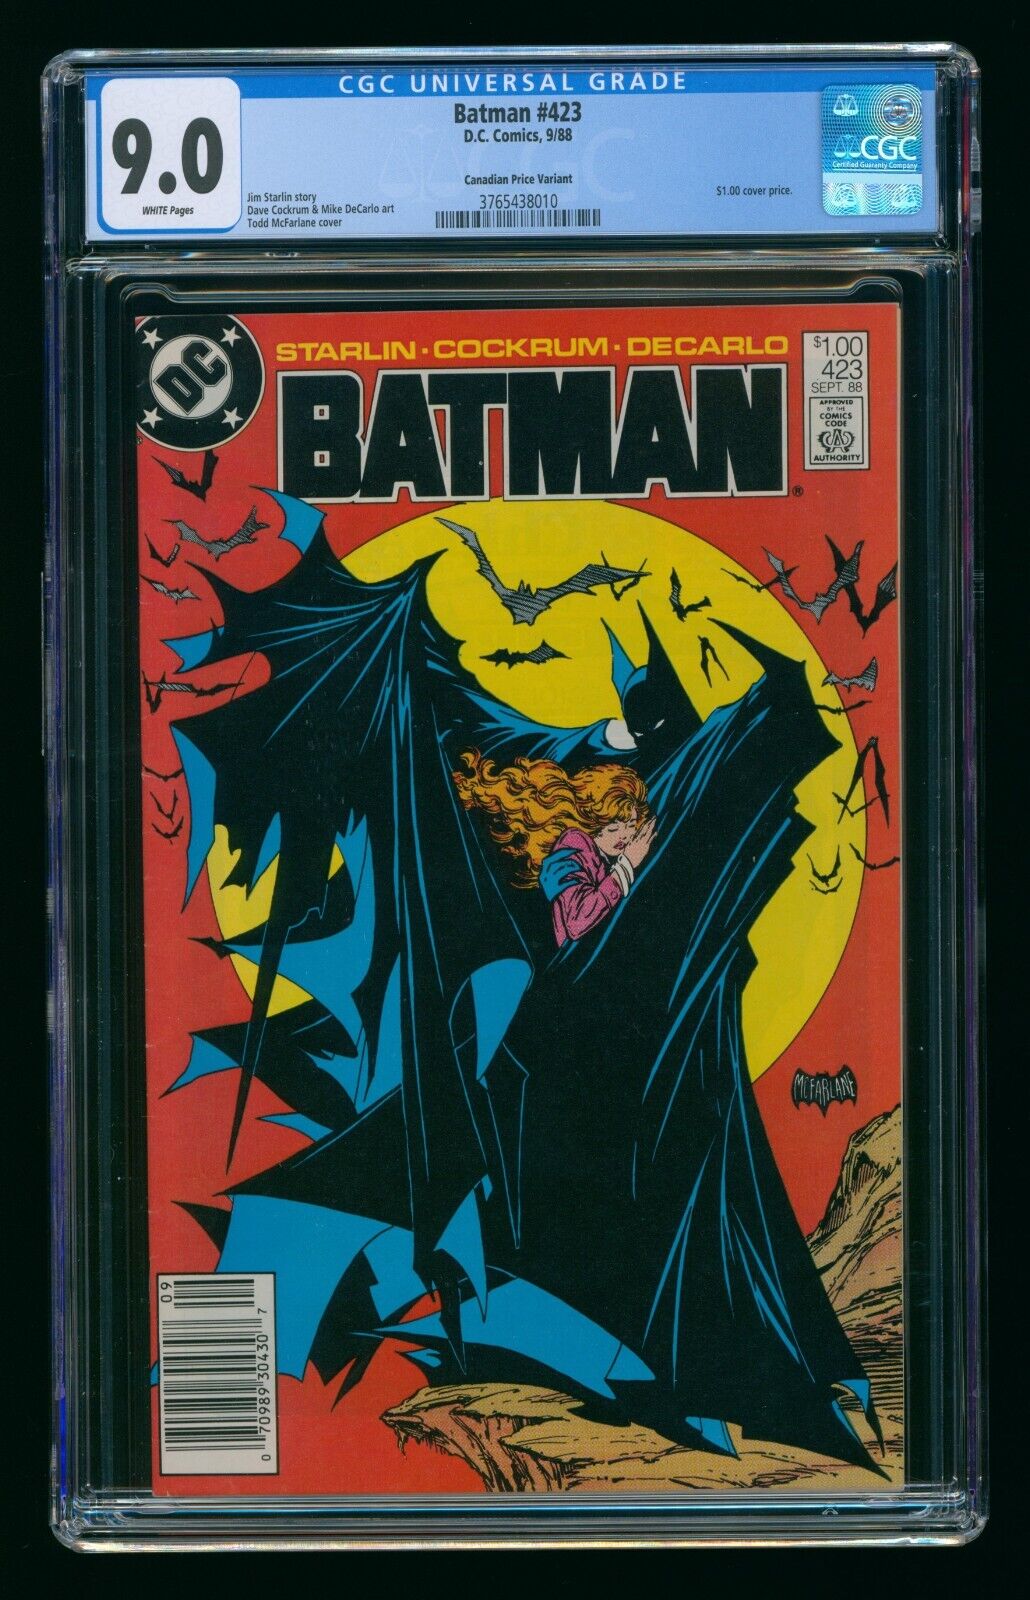 BATMAN #423 (1988) CGC 9.0 CANADIAN PRICE VARIANT CPV WHITE PAGES